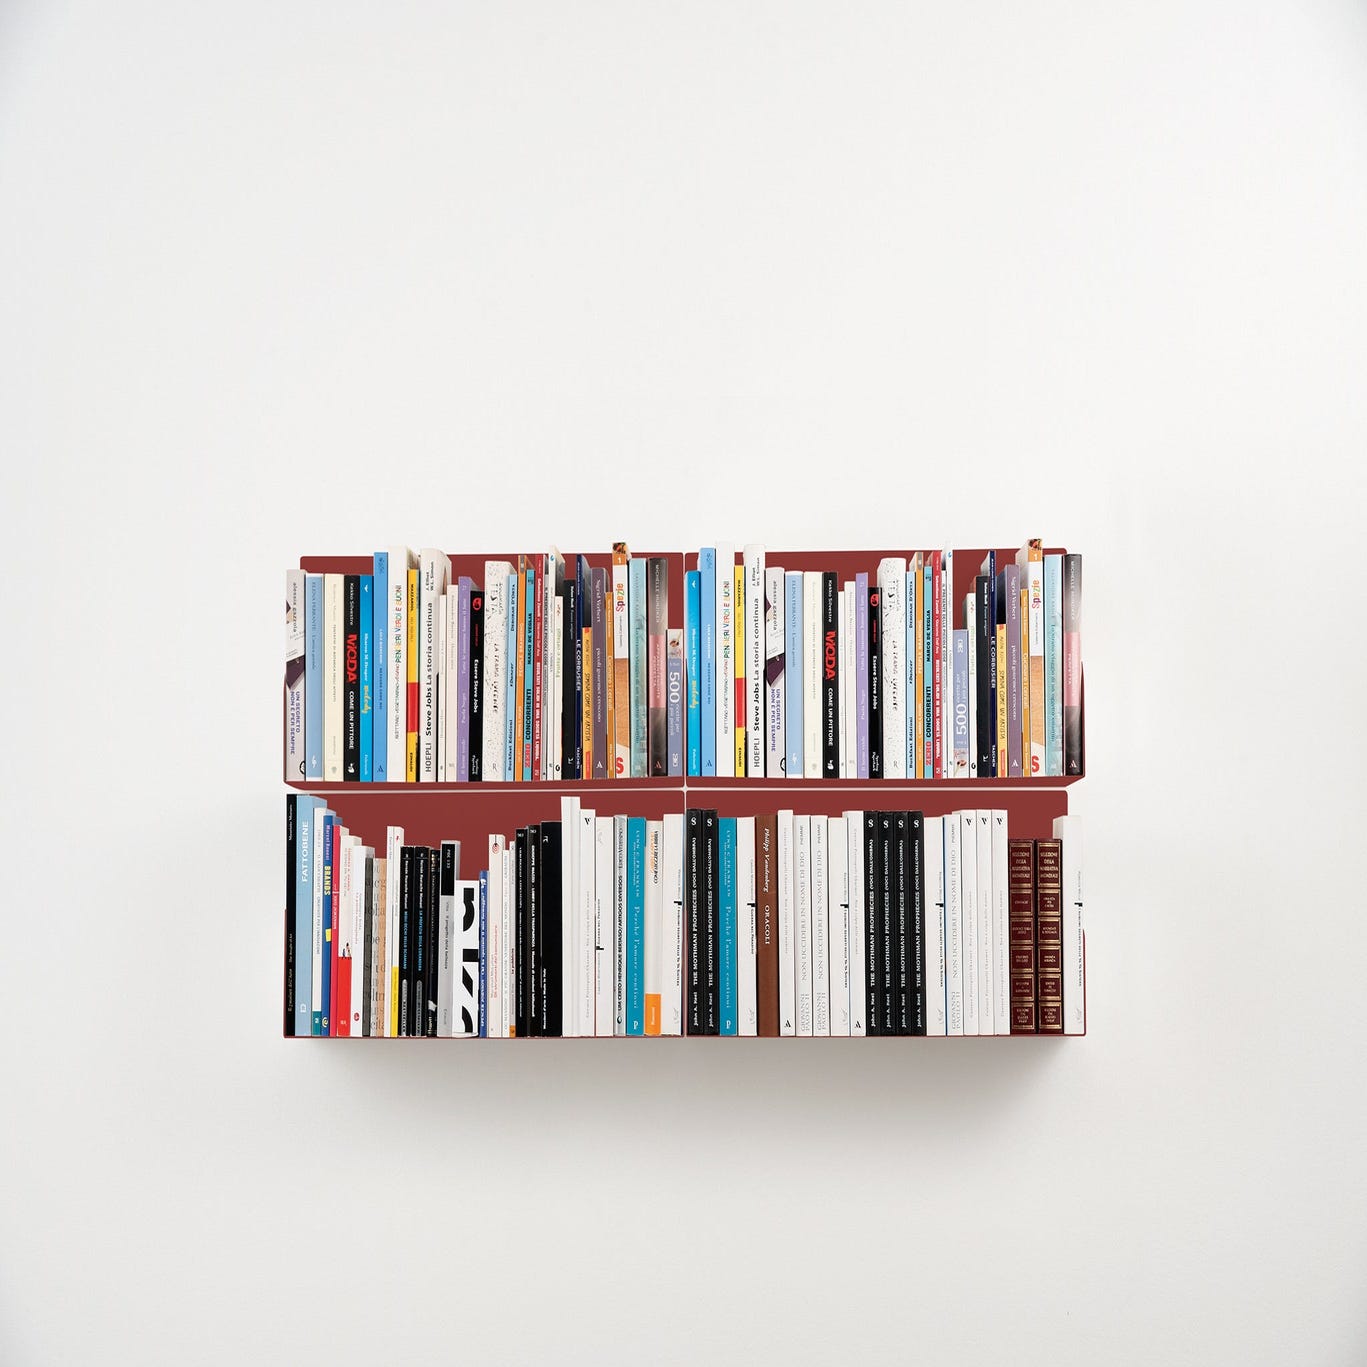 Buy The Wall Bookshelves Inches Long Set Of, 45% OFF